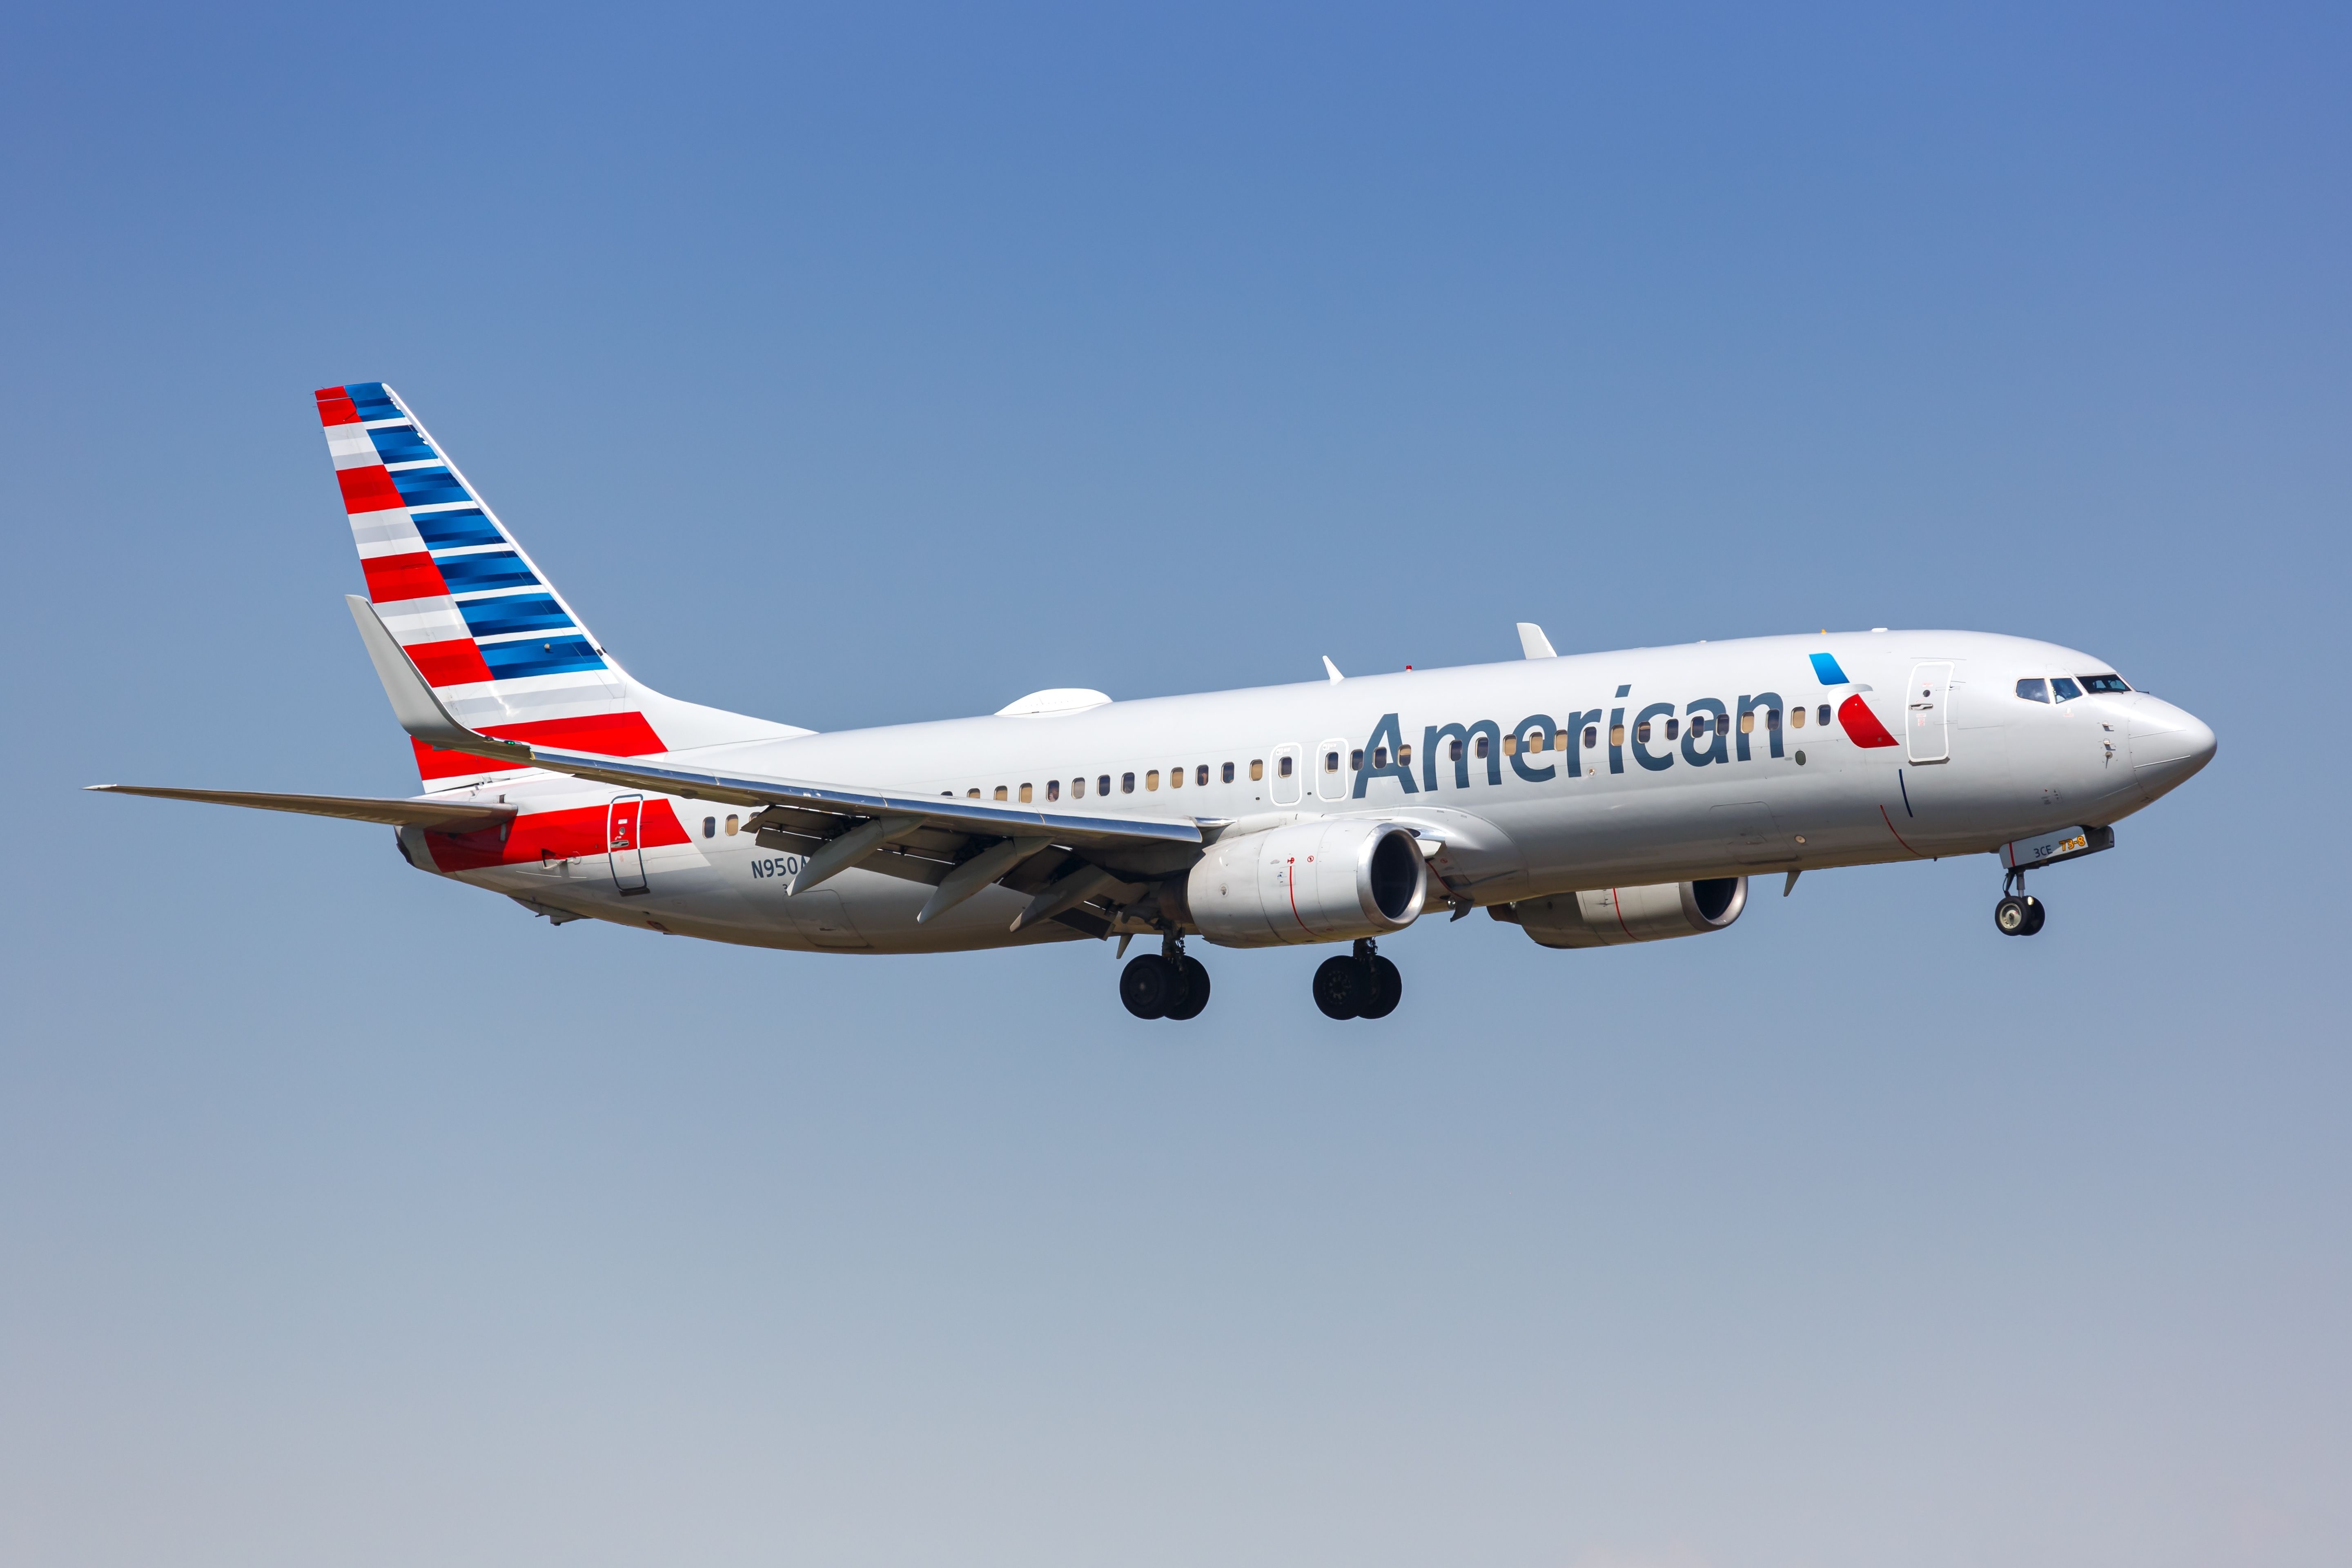 American Airlines Boeing 737-800 landing at Dallas Fort Worth International Airport DFW shutterstock_2418144695